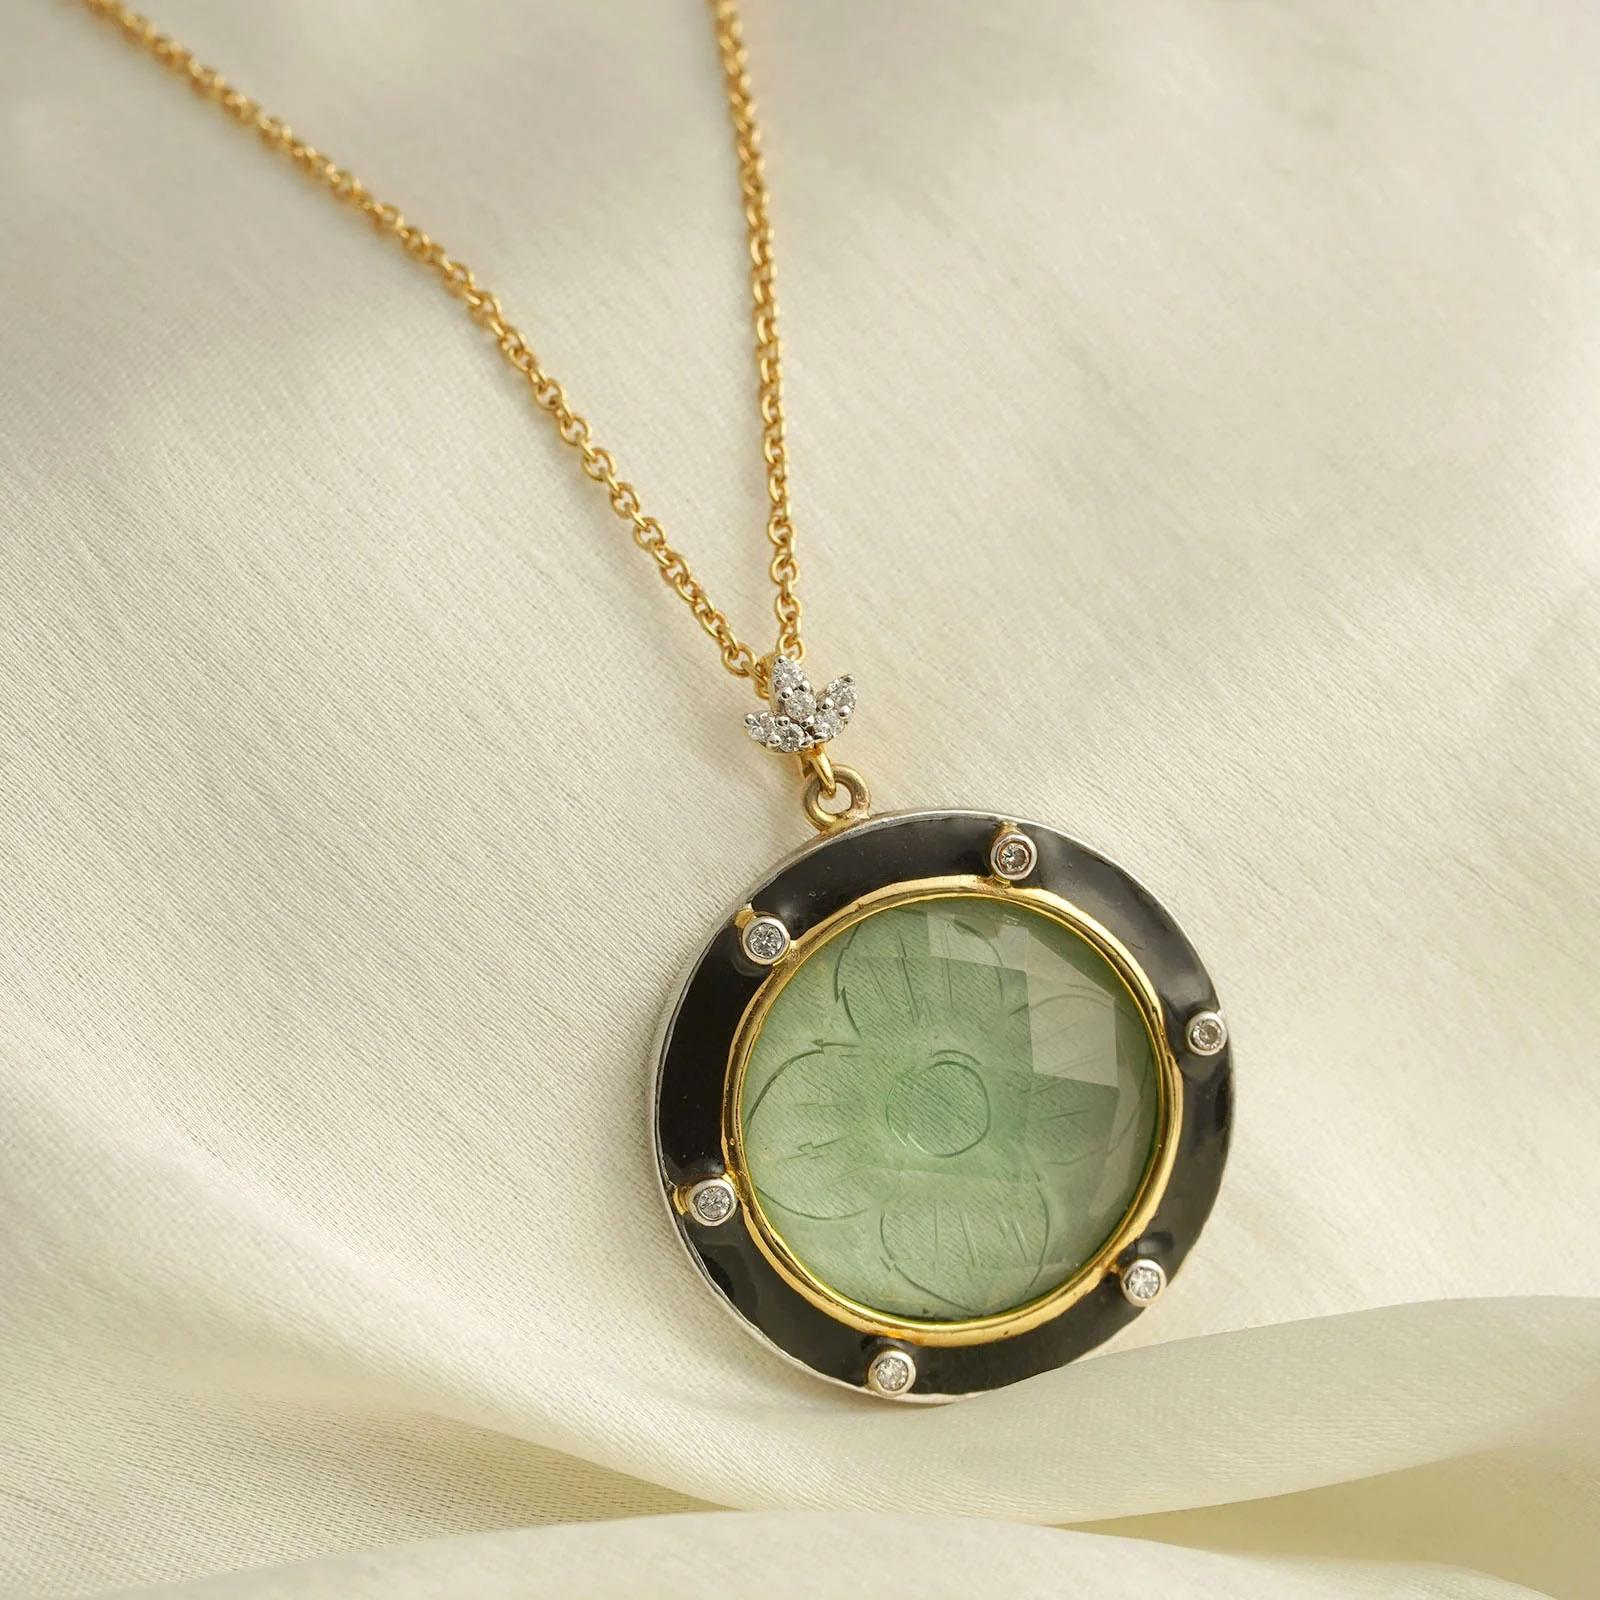 Gold(18K) : 3.70g
Gold(14K) : 3.81g
Diamonds : (VS clarity & H-I colour) : (Brilliant cut) : 0.12ct
Gemstone : Creative Tourmaline
Silver Alloy

Simple yet sophisticated, the Rory Gilmore pendant epitomizes style, grace and elegance, dare we say,